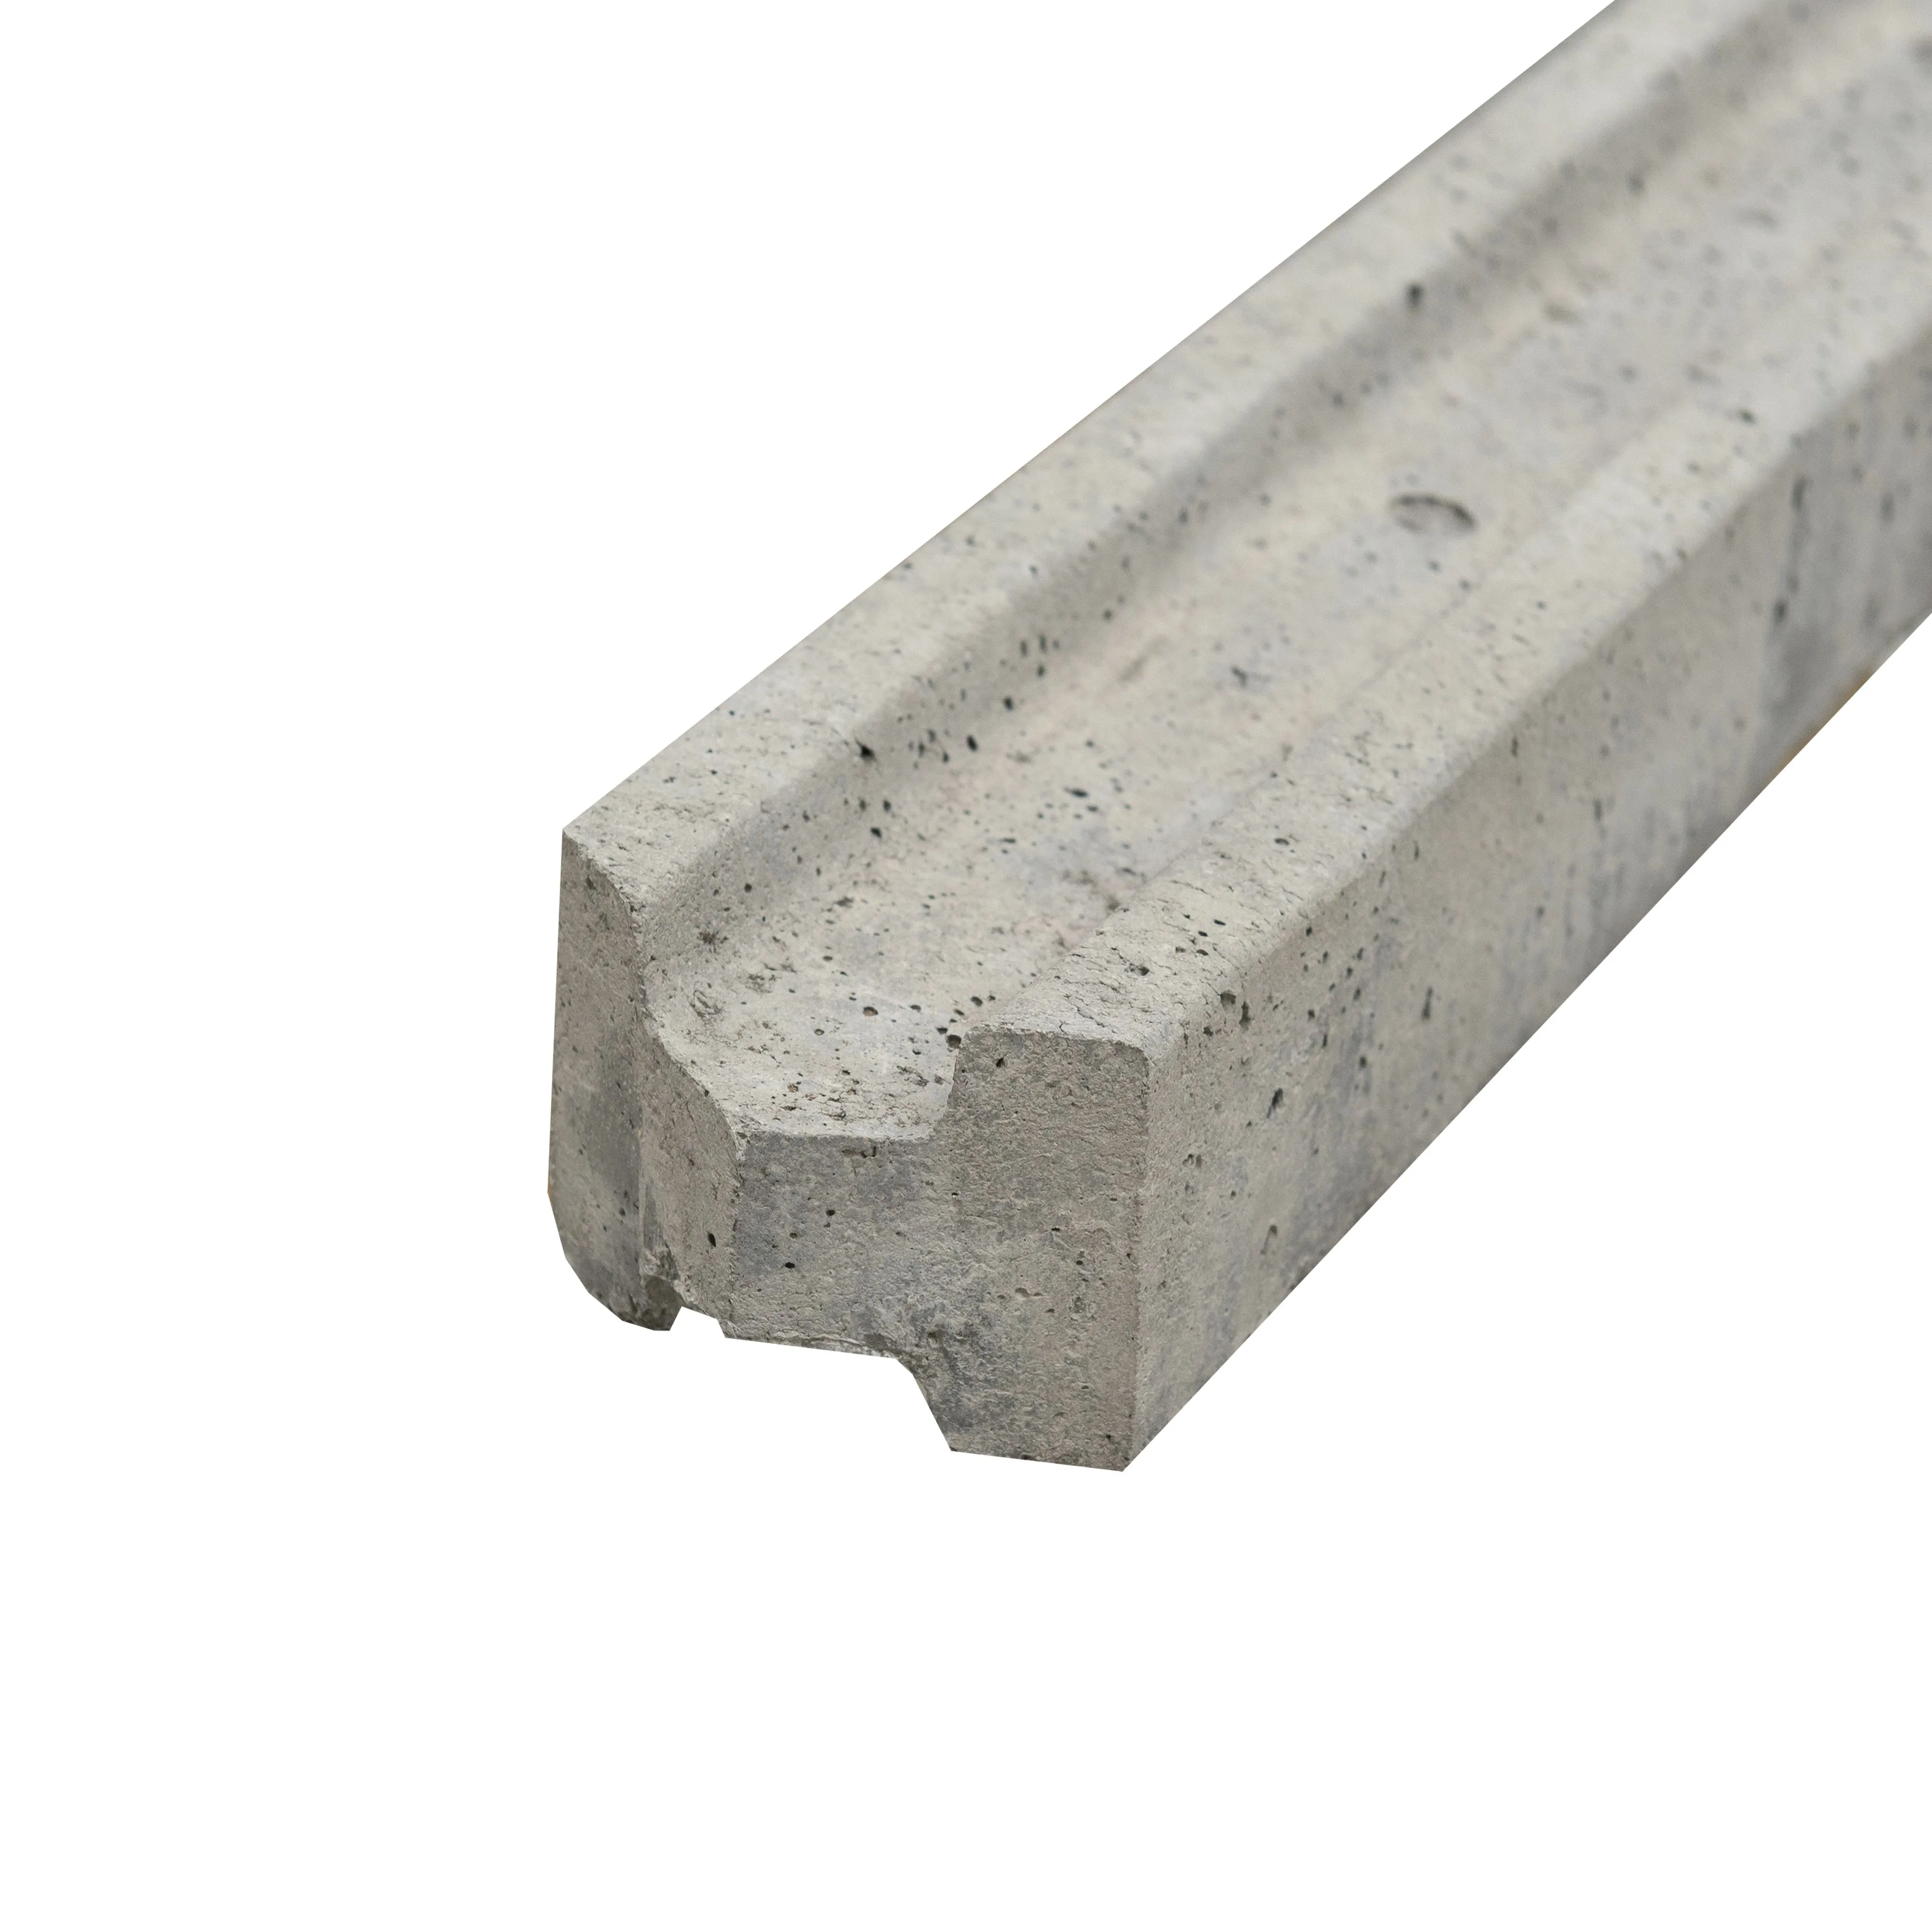 Concrete Grey Square Fence post (H)2.36m (W)85mm, Pack of 4